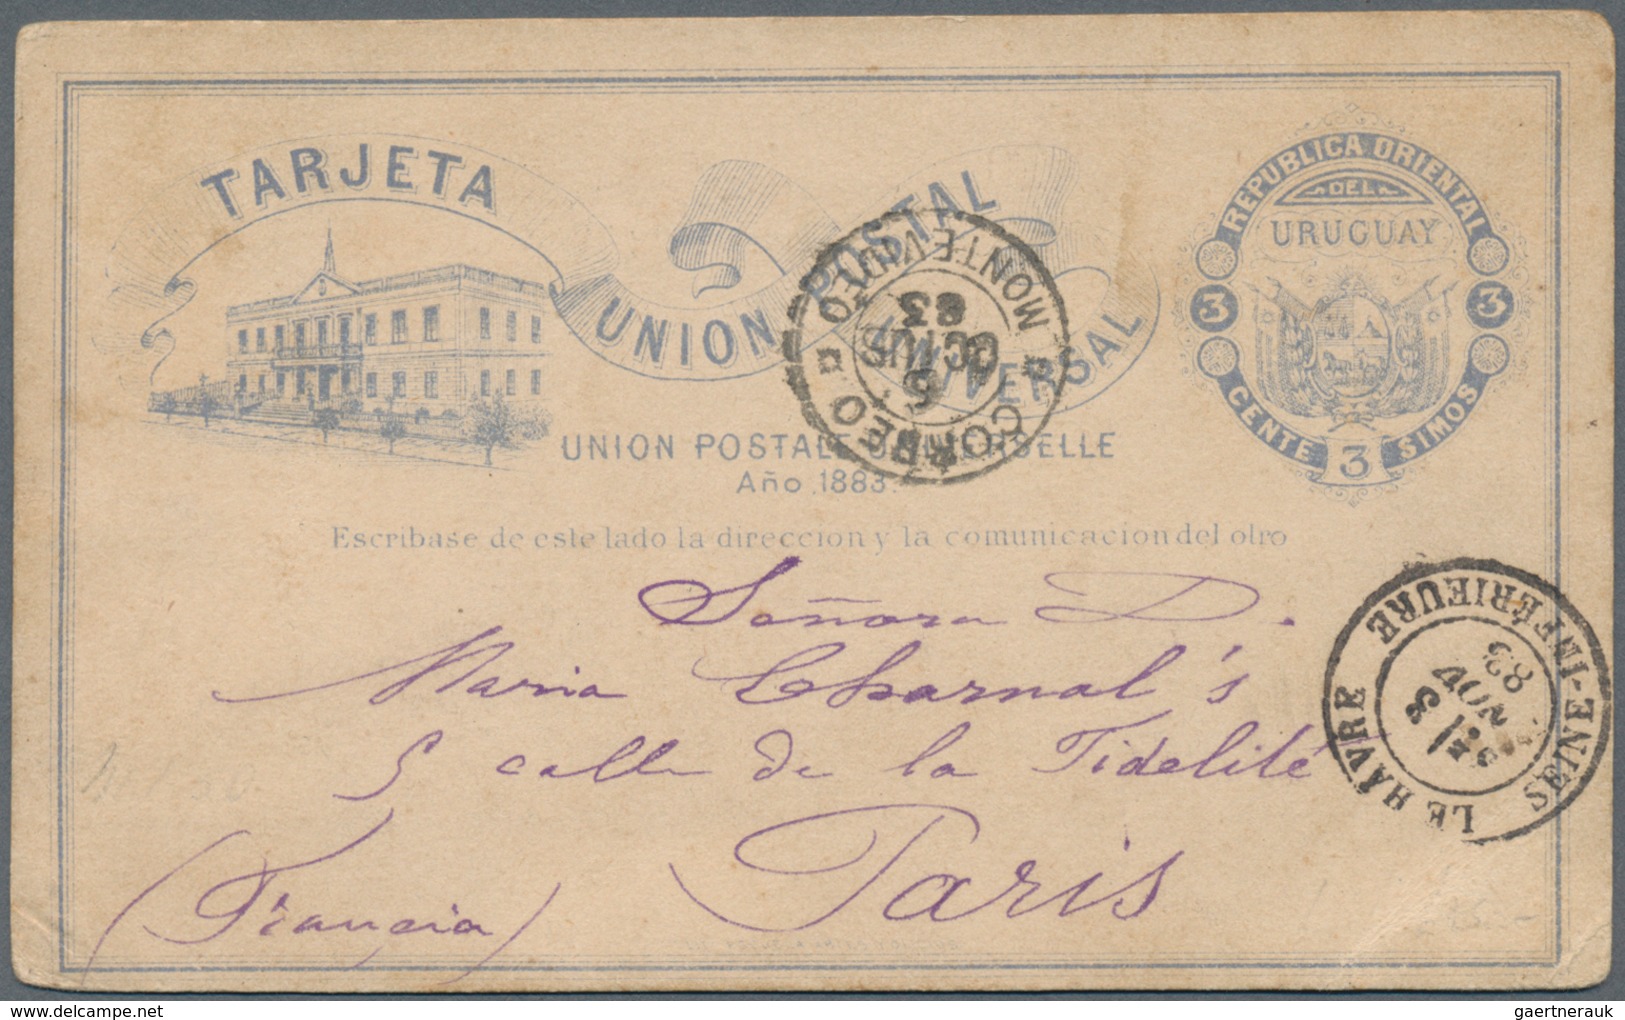 Uruguay: 1880/1904, stationery cards used (7 inc. two uprated) inc. 6 to foreign to France, Germany